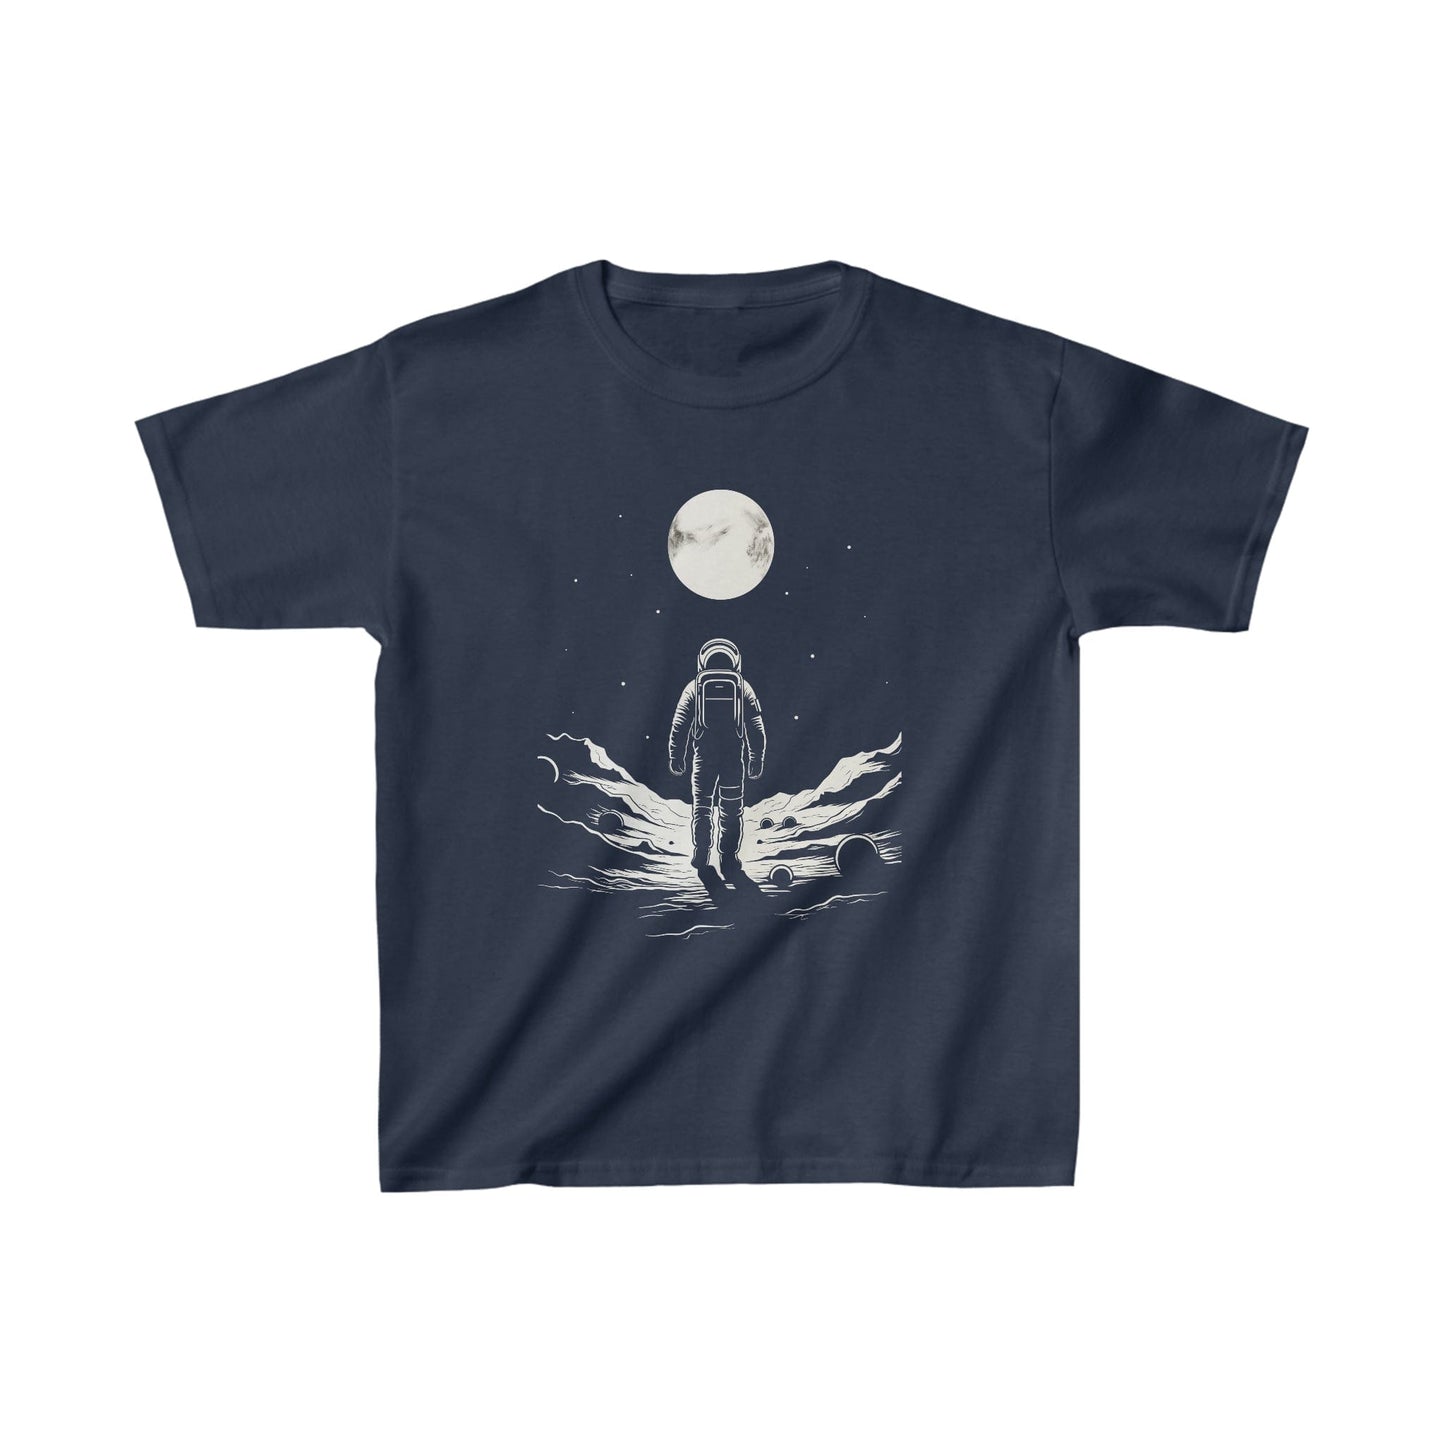 Kids clothes XS / Navy Youth Lone Astronaut Moon Explorer T-Shirt